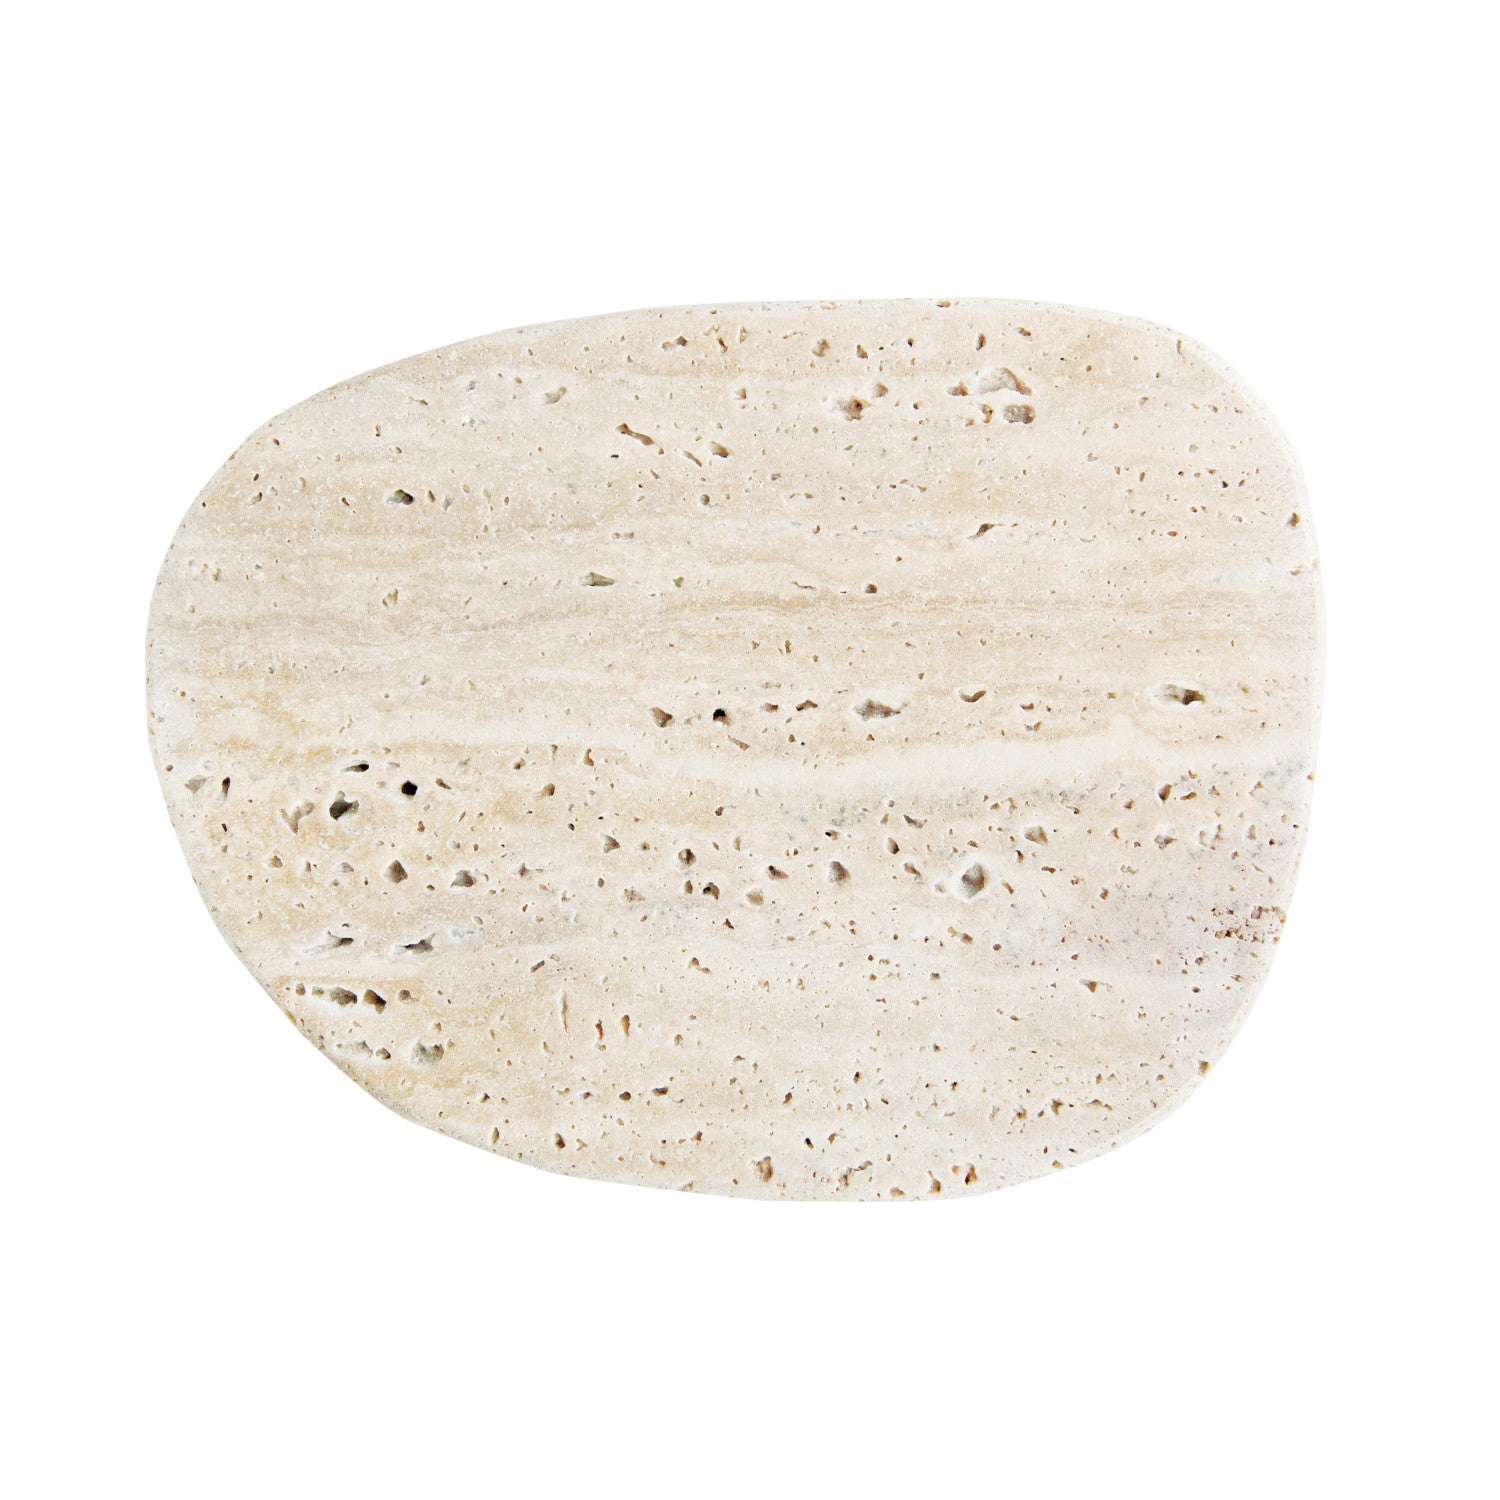 12"L x 9"W Travertine Organic Shaped Cheese/Cutting Board, Natural (Each One Will Vary)